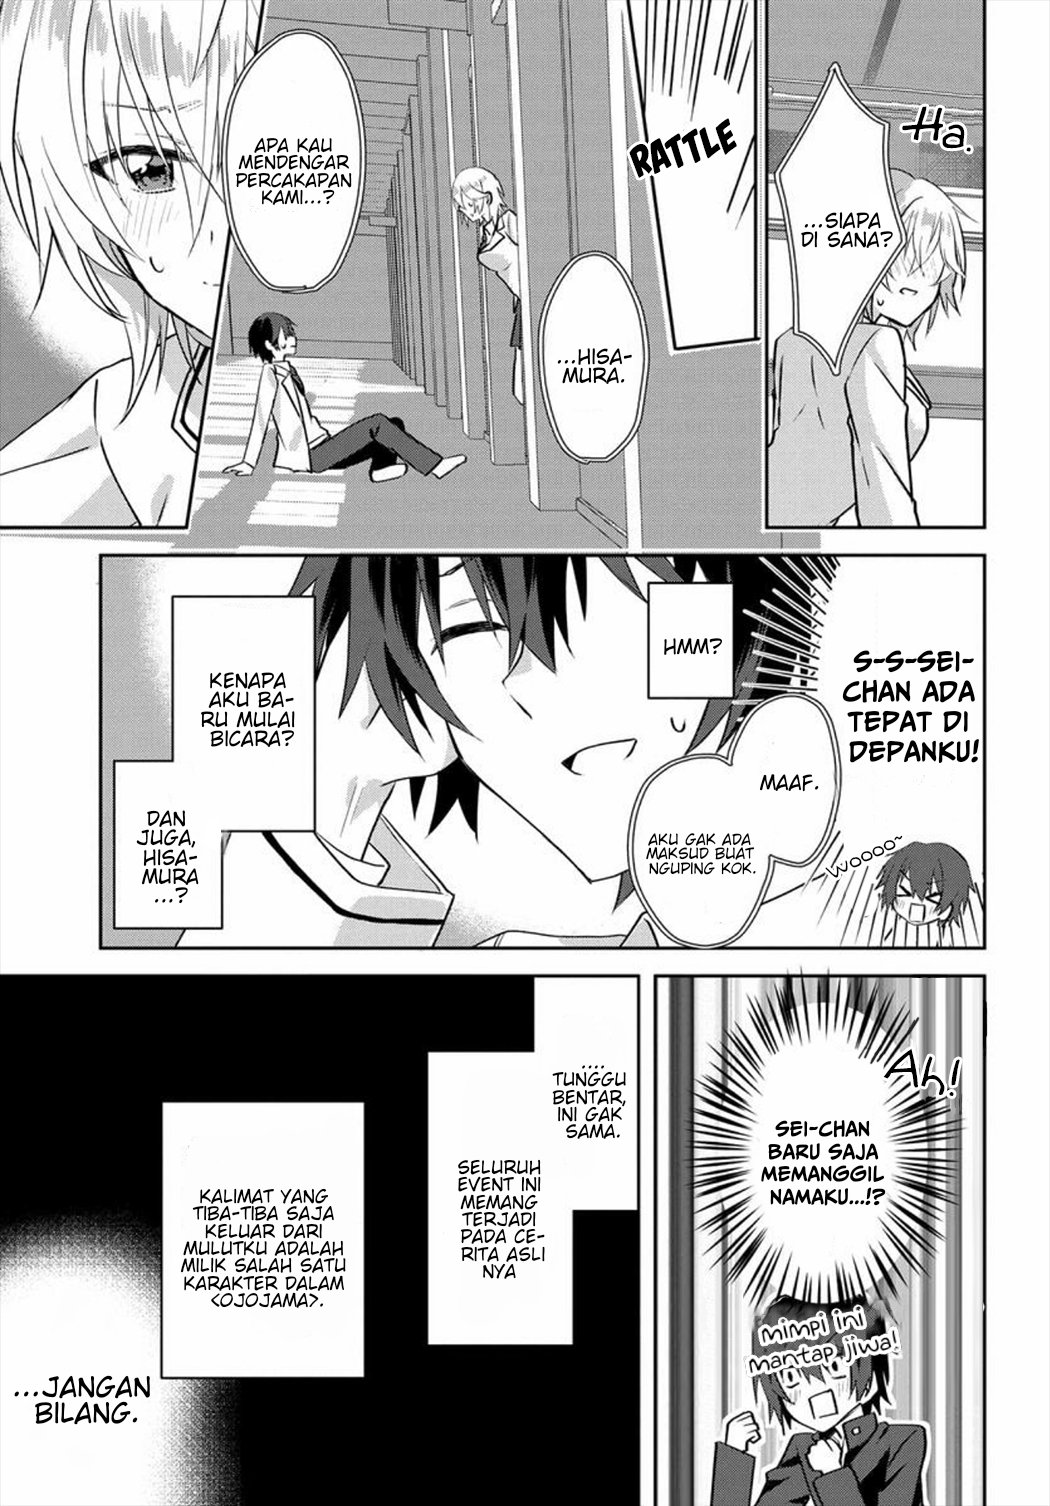 Since I'Ve Entered The World Of Romantic Comedy Manga, I'Ll Do My Best To Make The Losing Heroine Happy. Chapter 1 - 229